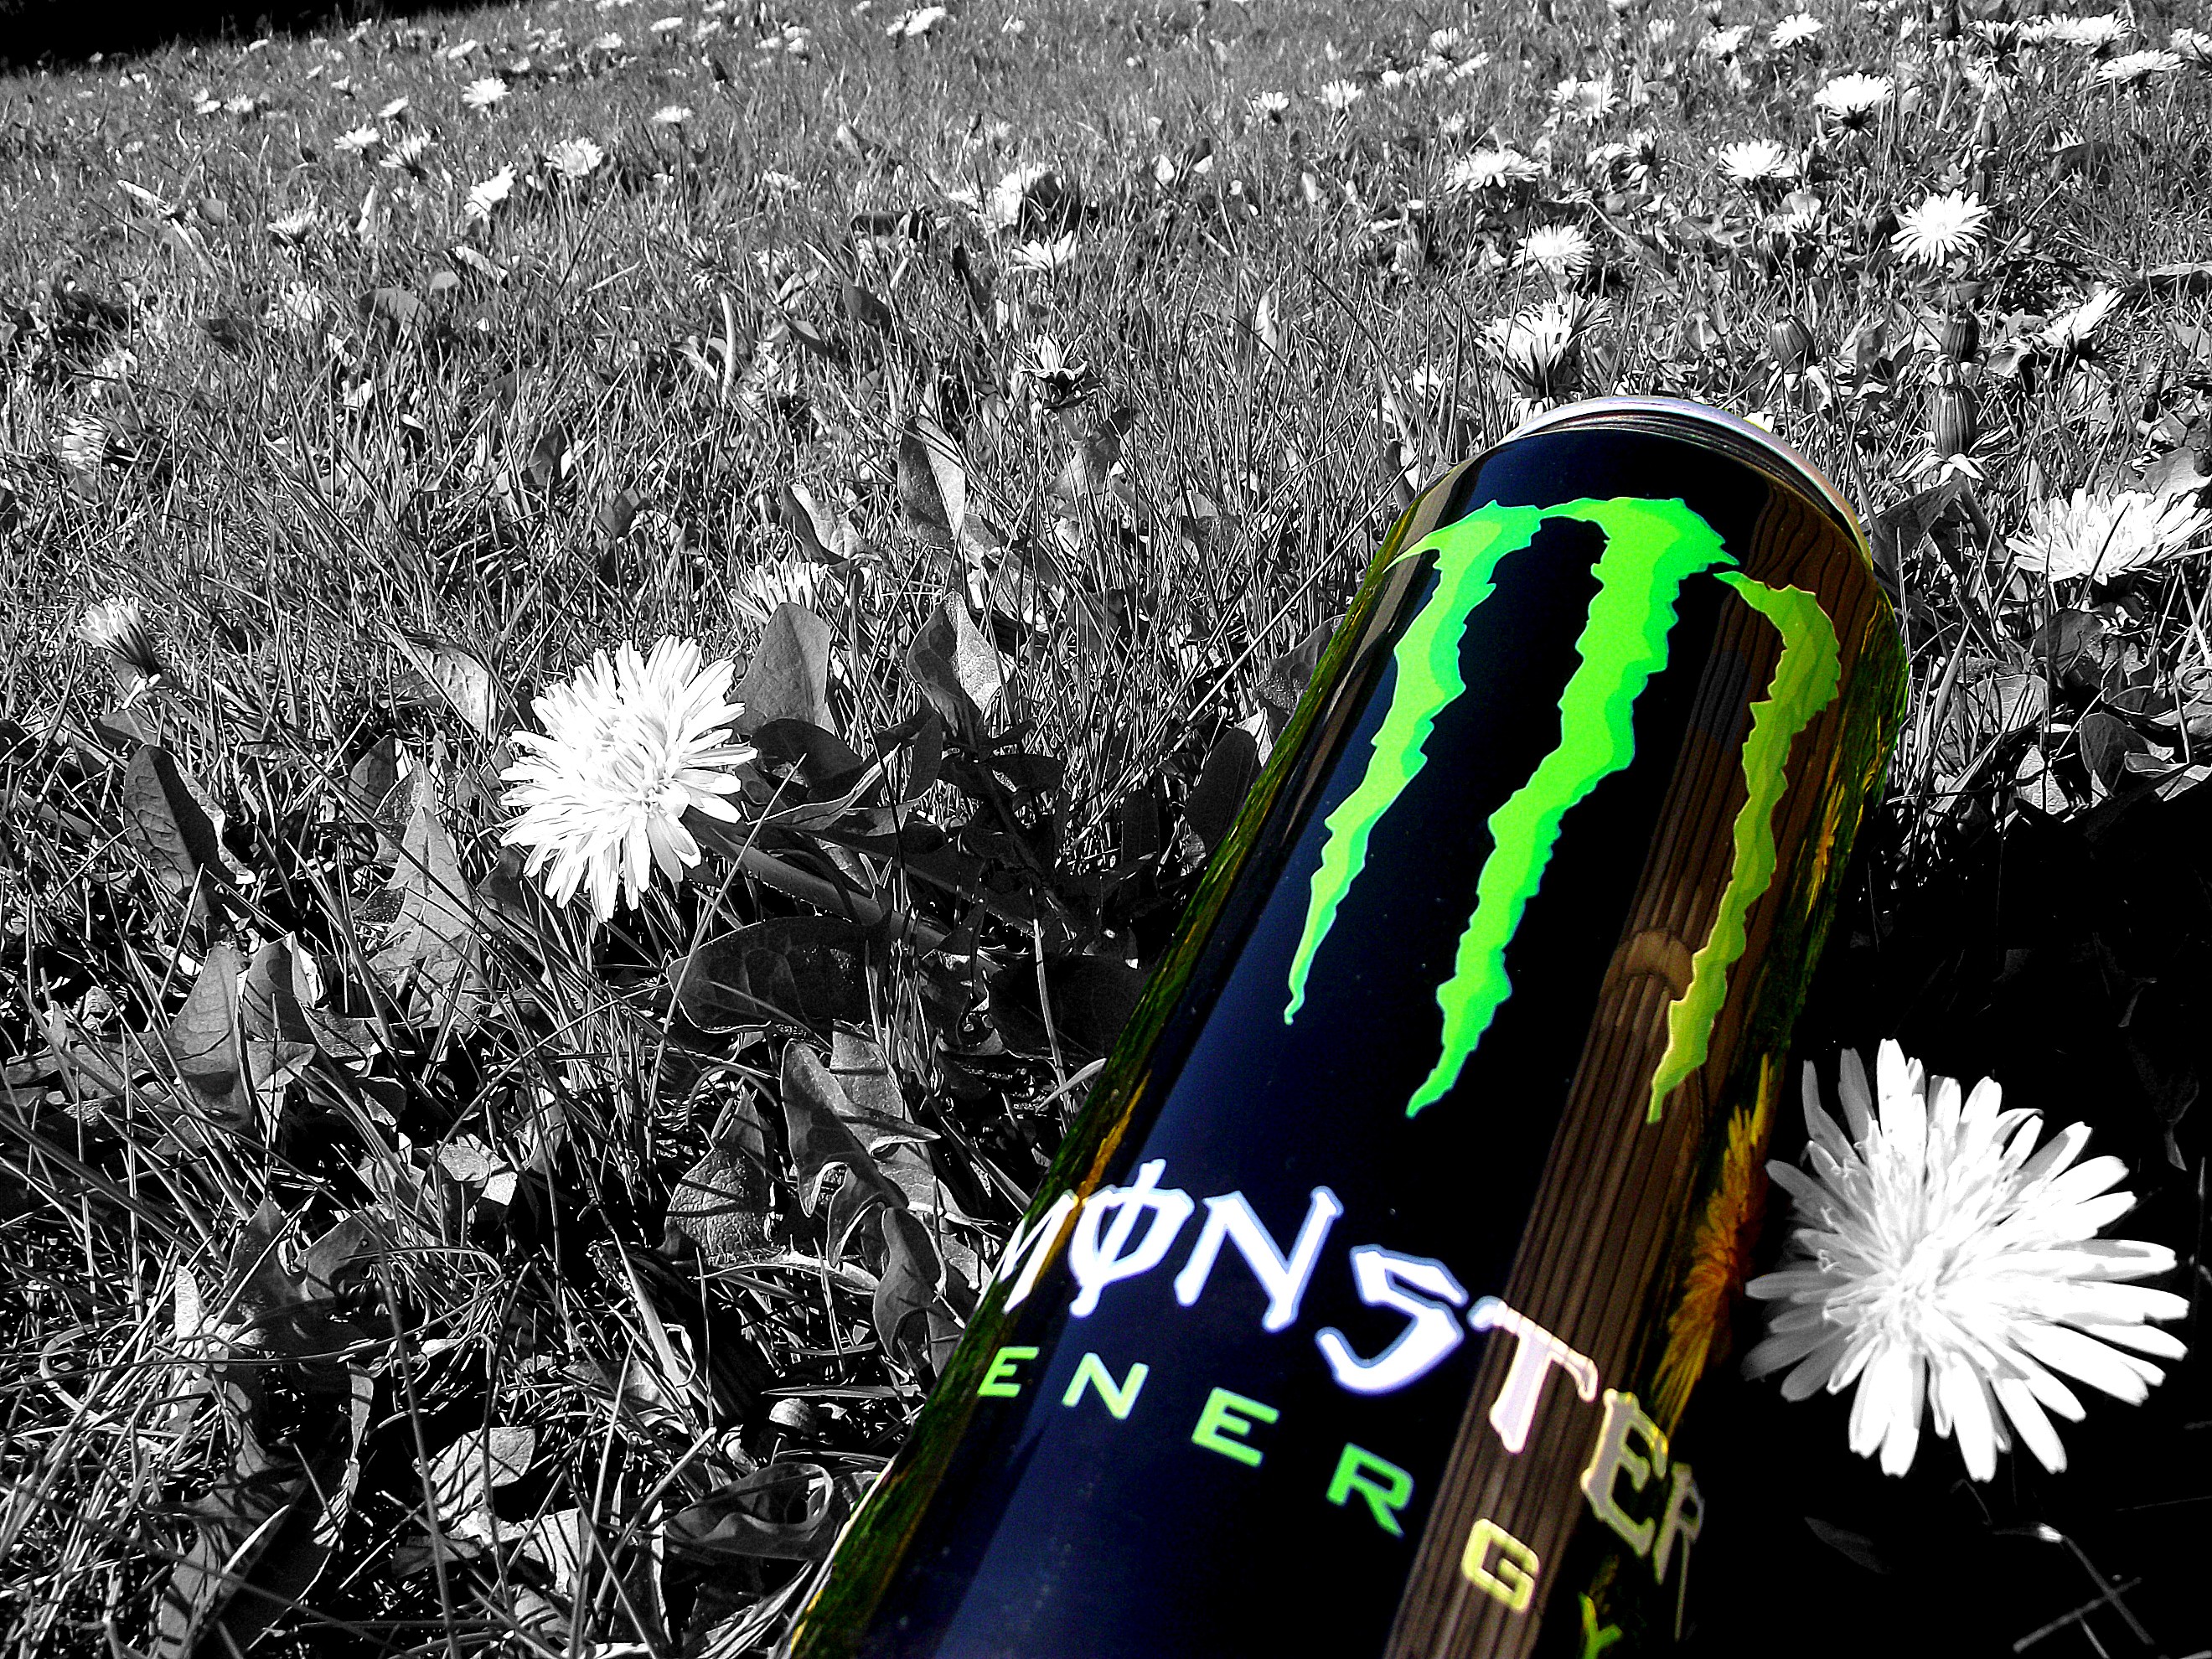 Monster Energy wallpaper ·① Download free cool HD ...